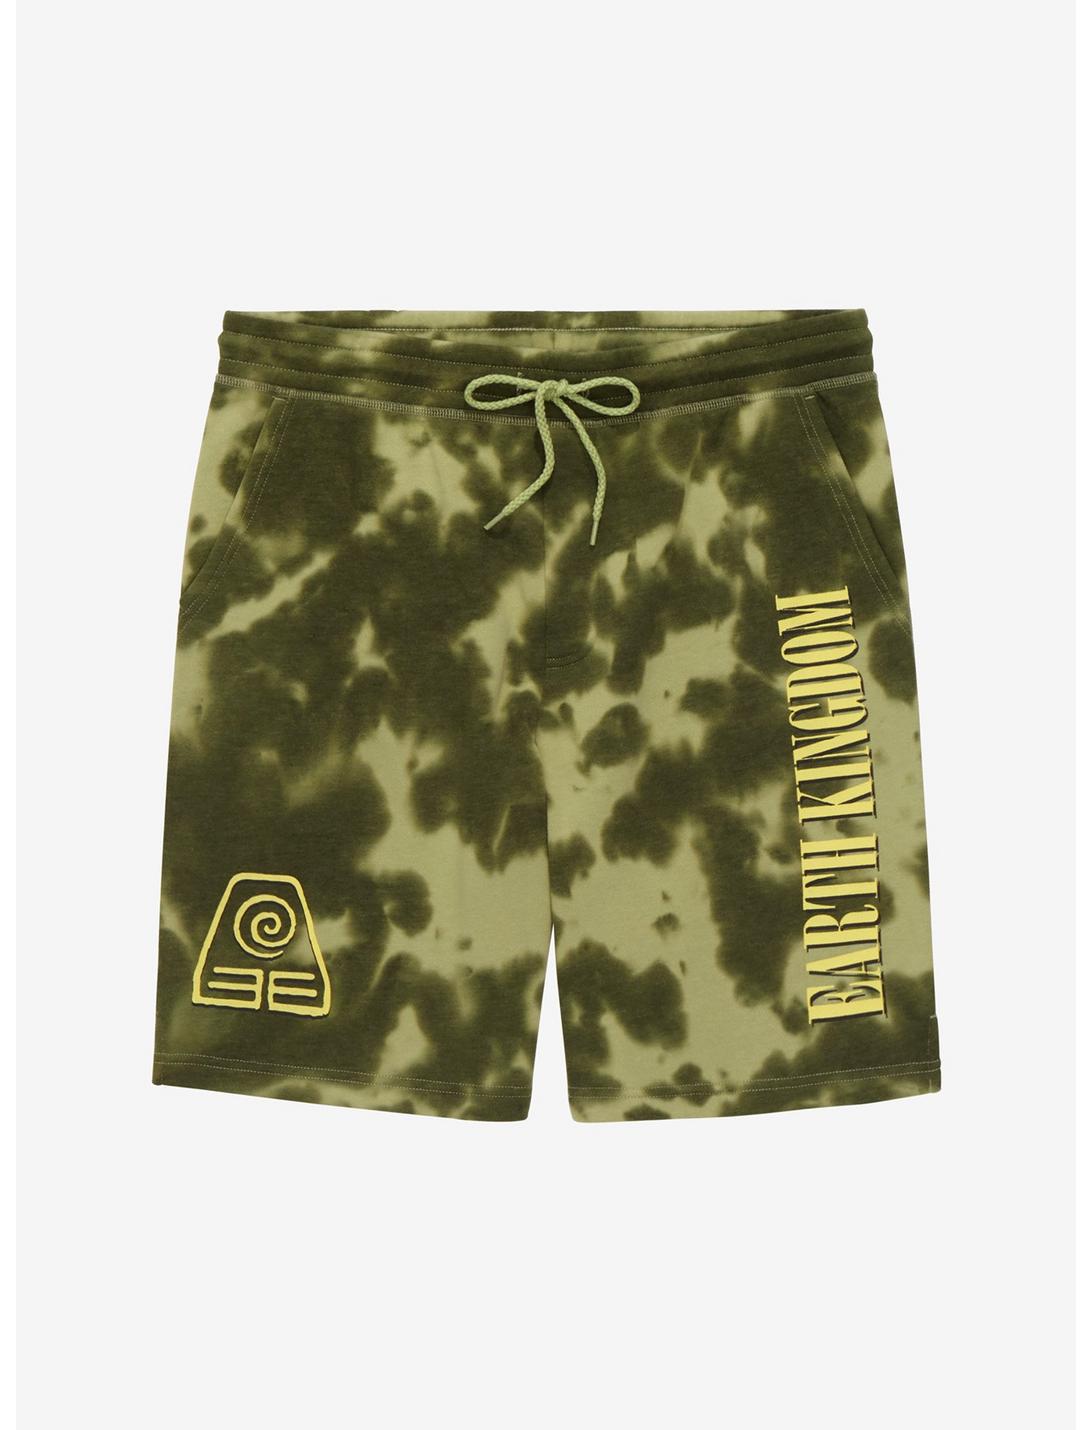 Avatar: The Last Airbender Earth Kingdom Tie-Dye Shorts - BoxLunch Exclusive, MULTI, hi-res